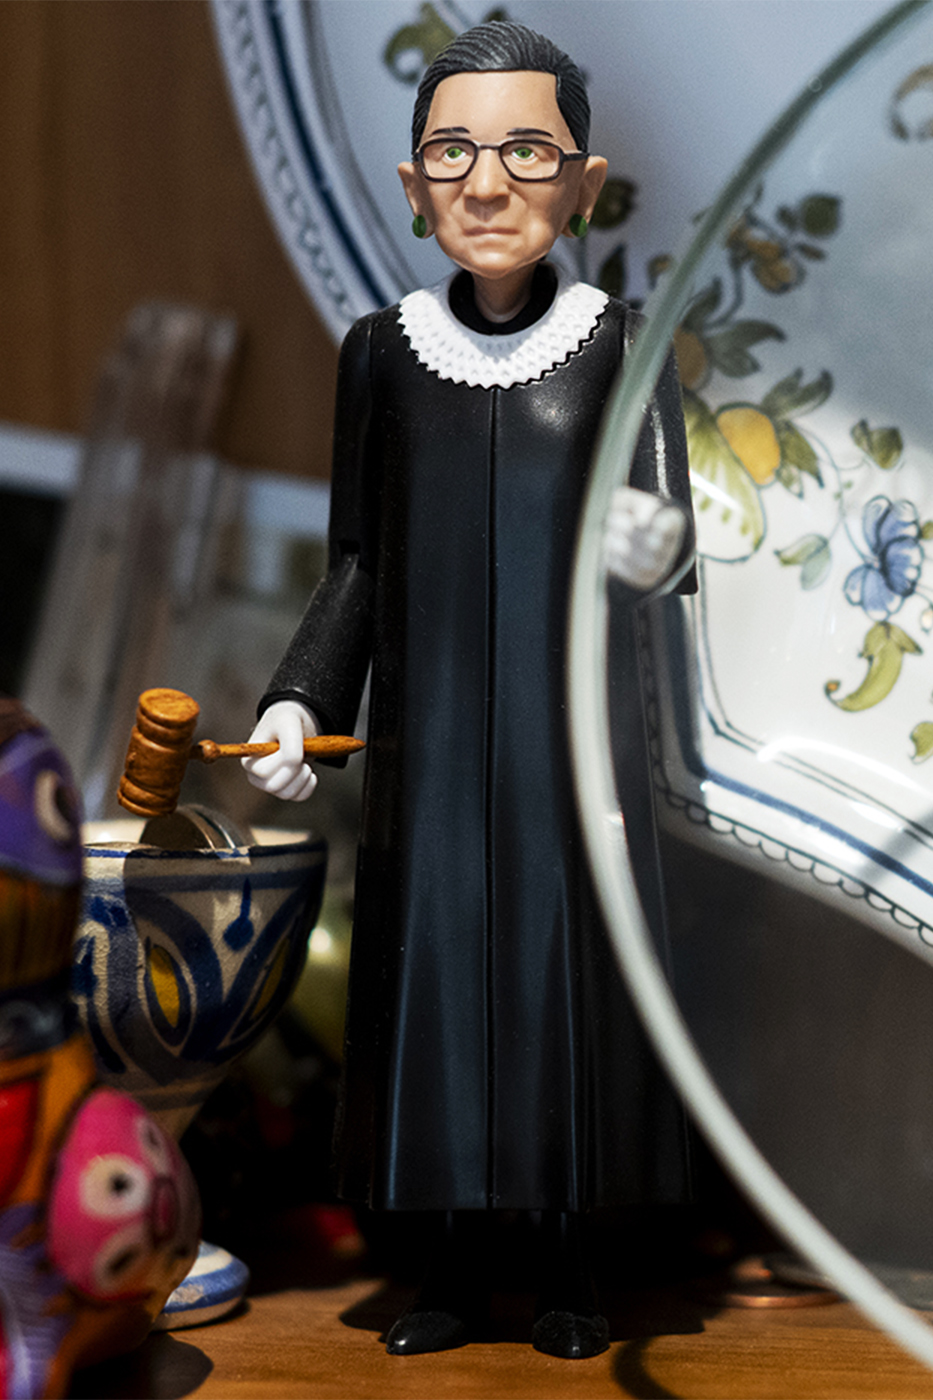 small figurine of Ruth Bader Ginsburg